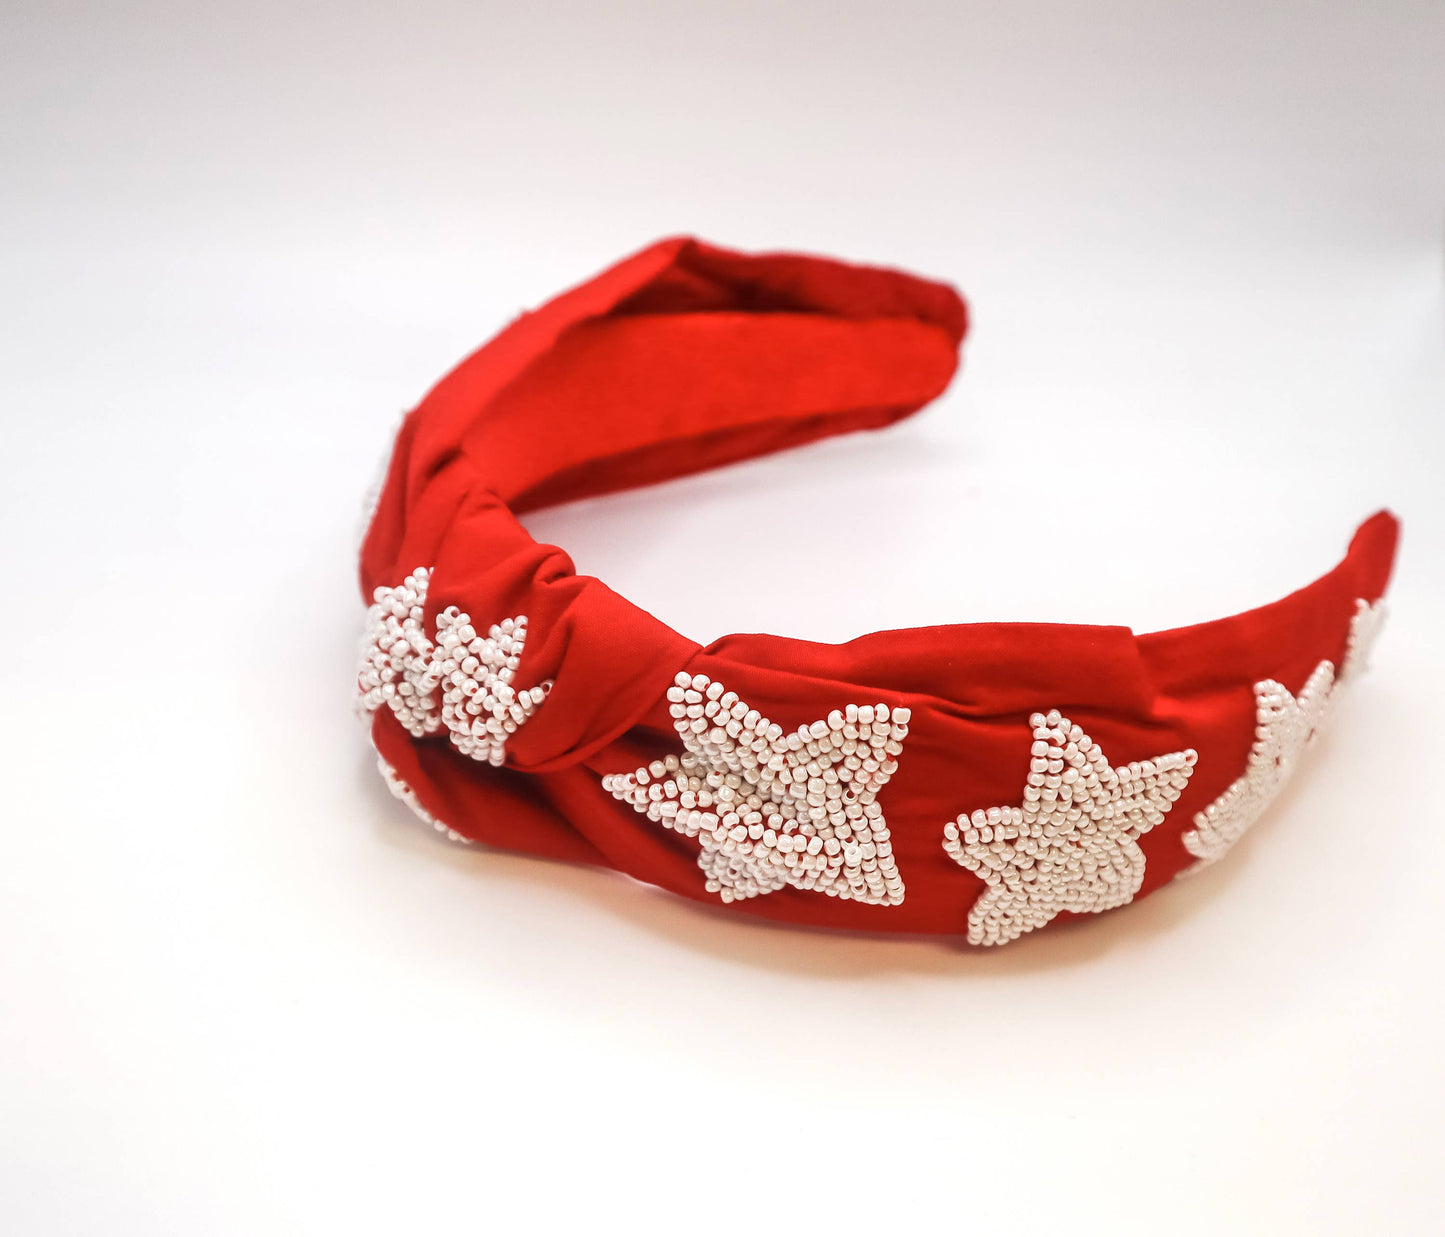 A Bash New Orleans Football Headband with Black and Gold Stars on a red background.